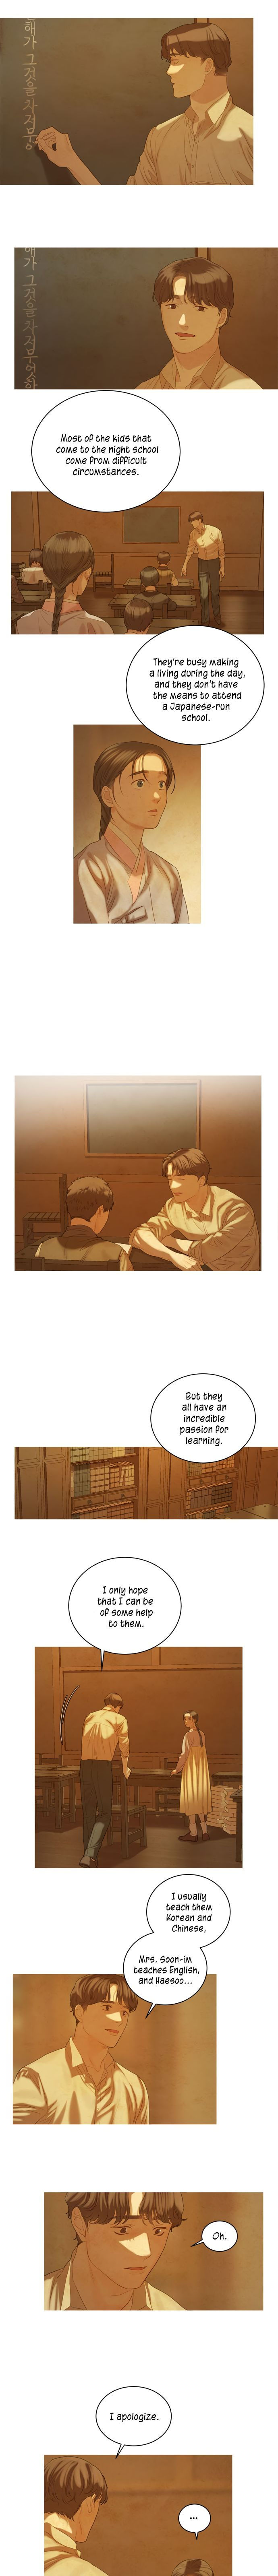 Gorae Byul - The Gyeongseong Mermaid - Chapter 27 Page 6